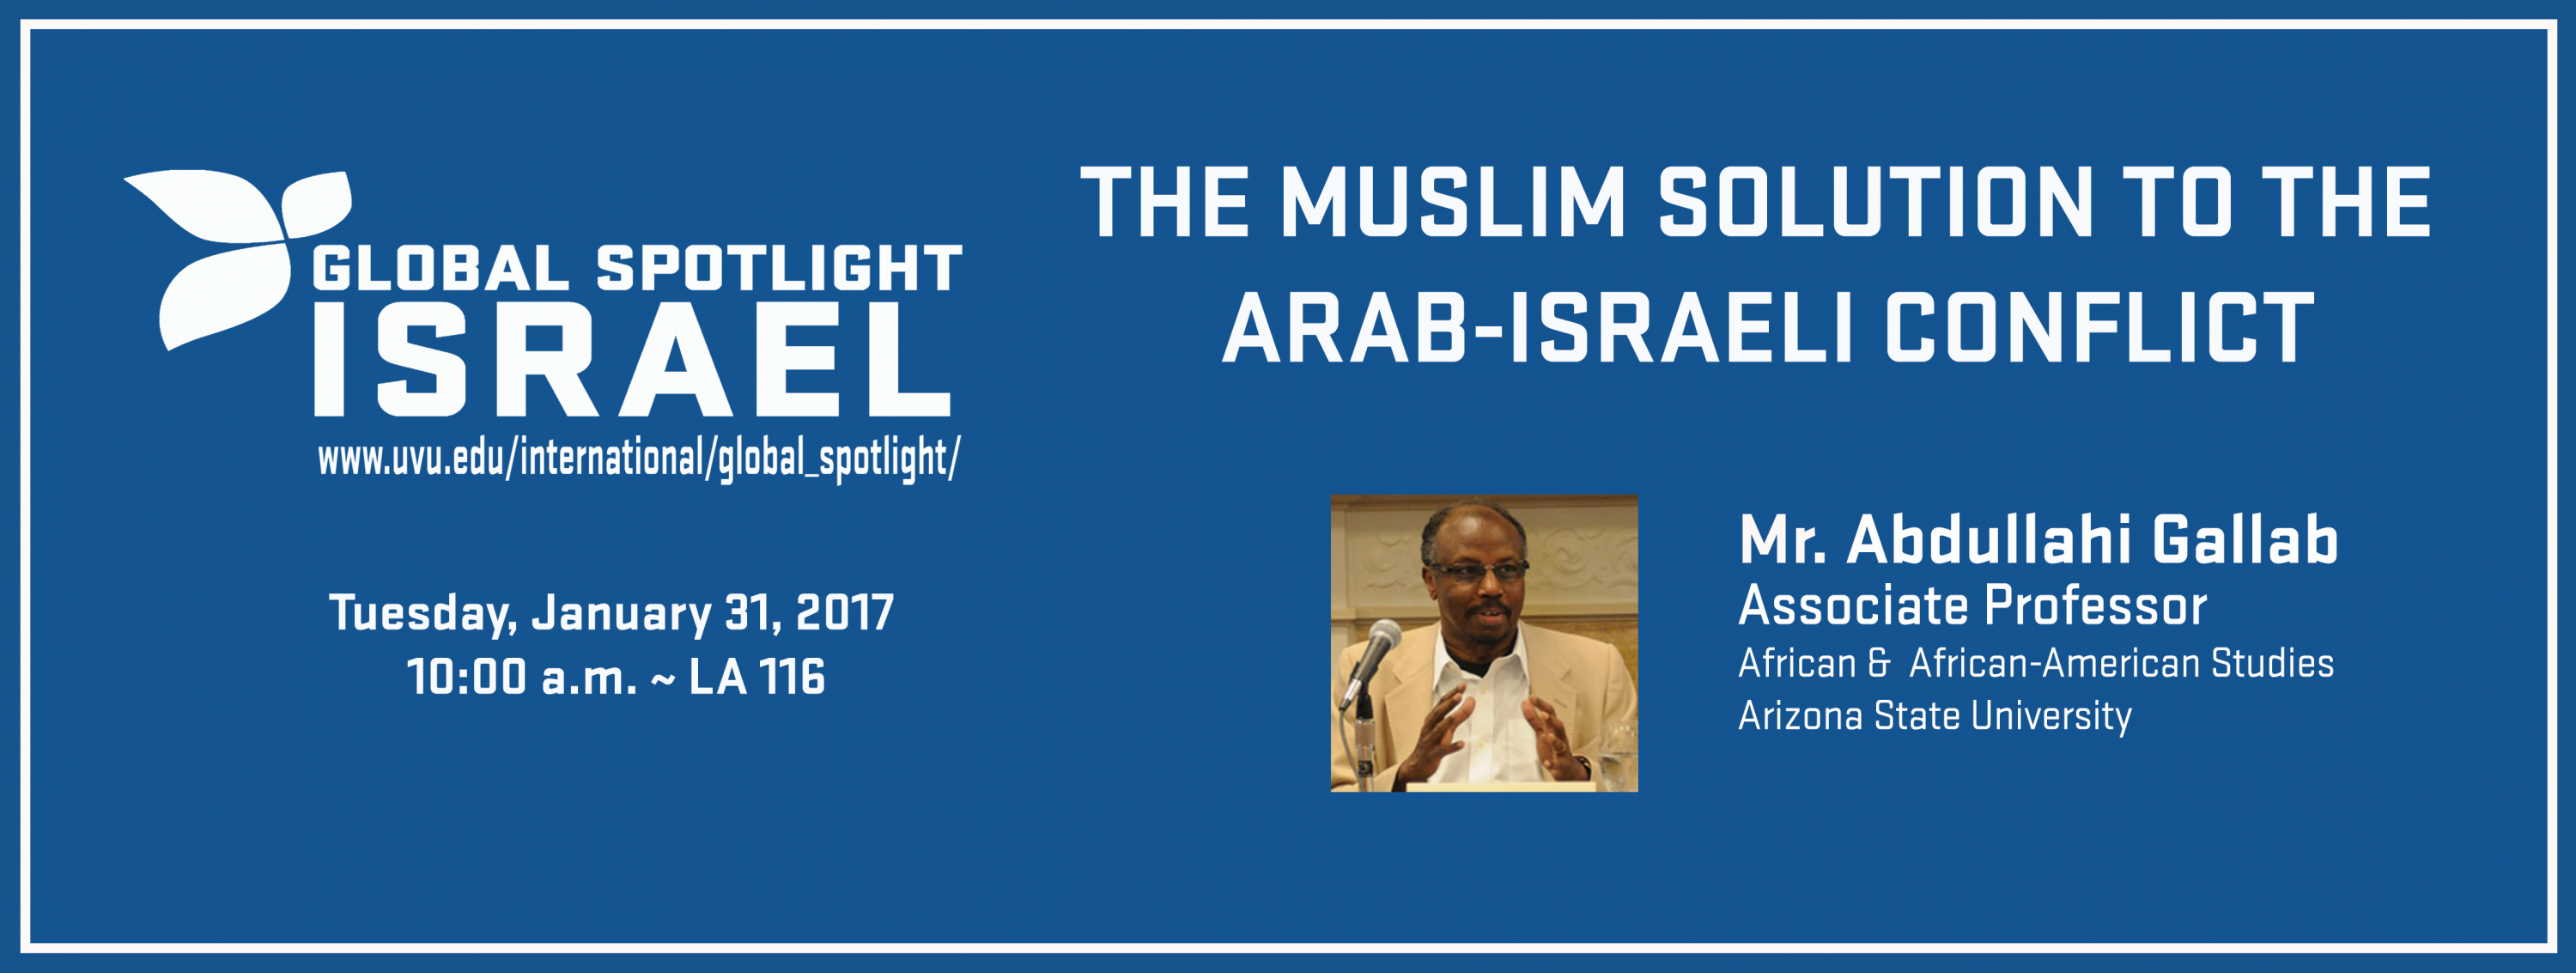 DR. ABDULLAHI GALLAB: THE MUSLIM SOLUTION TO THE ARAB - ISRAELI CONFLICT